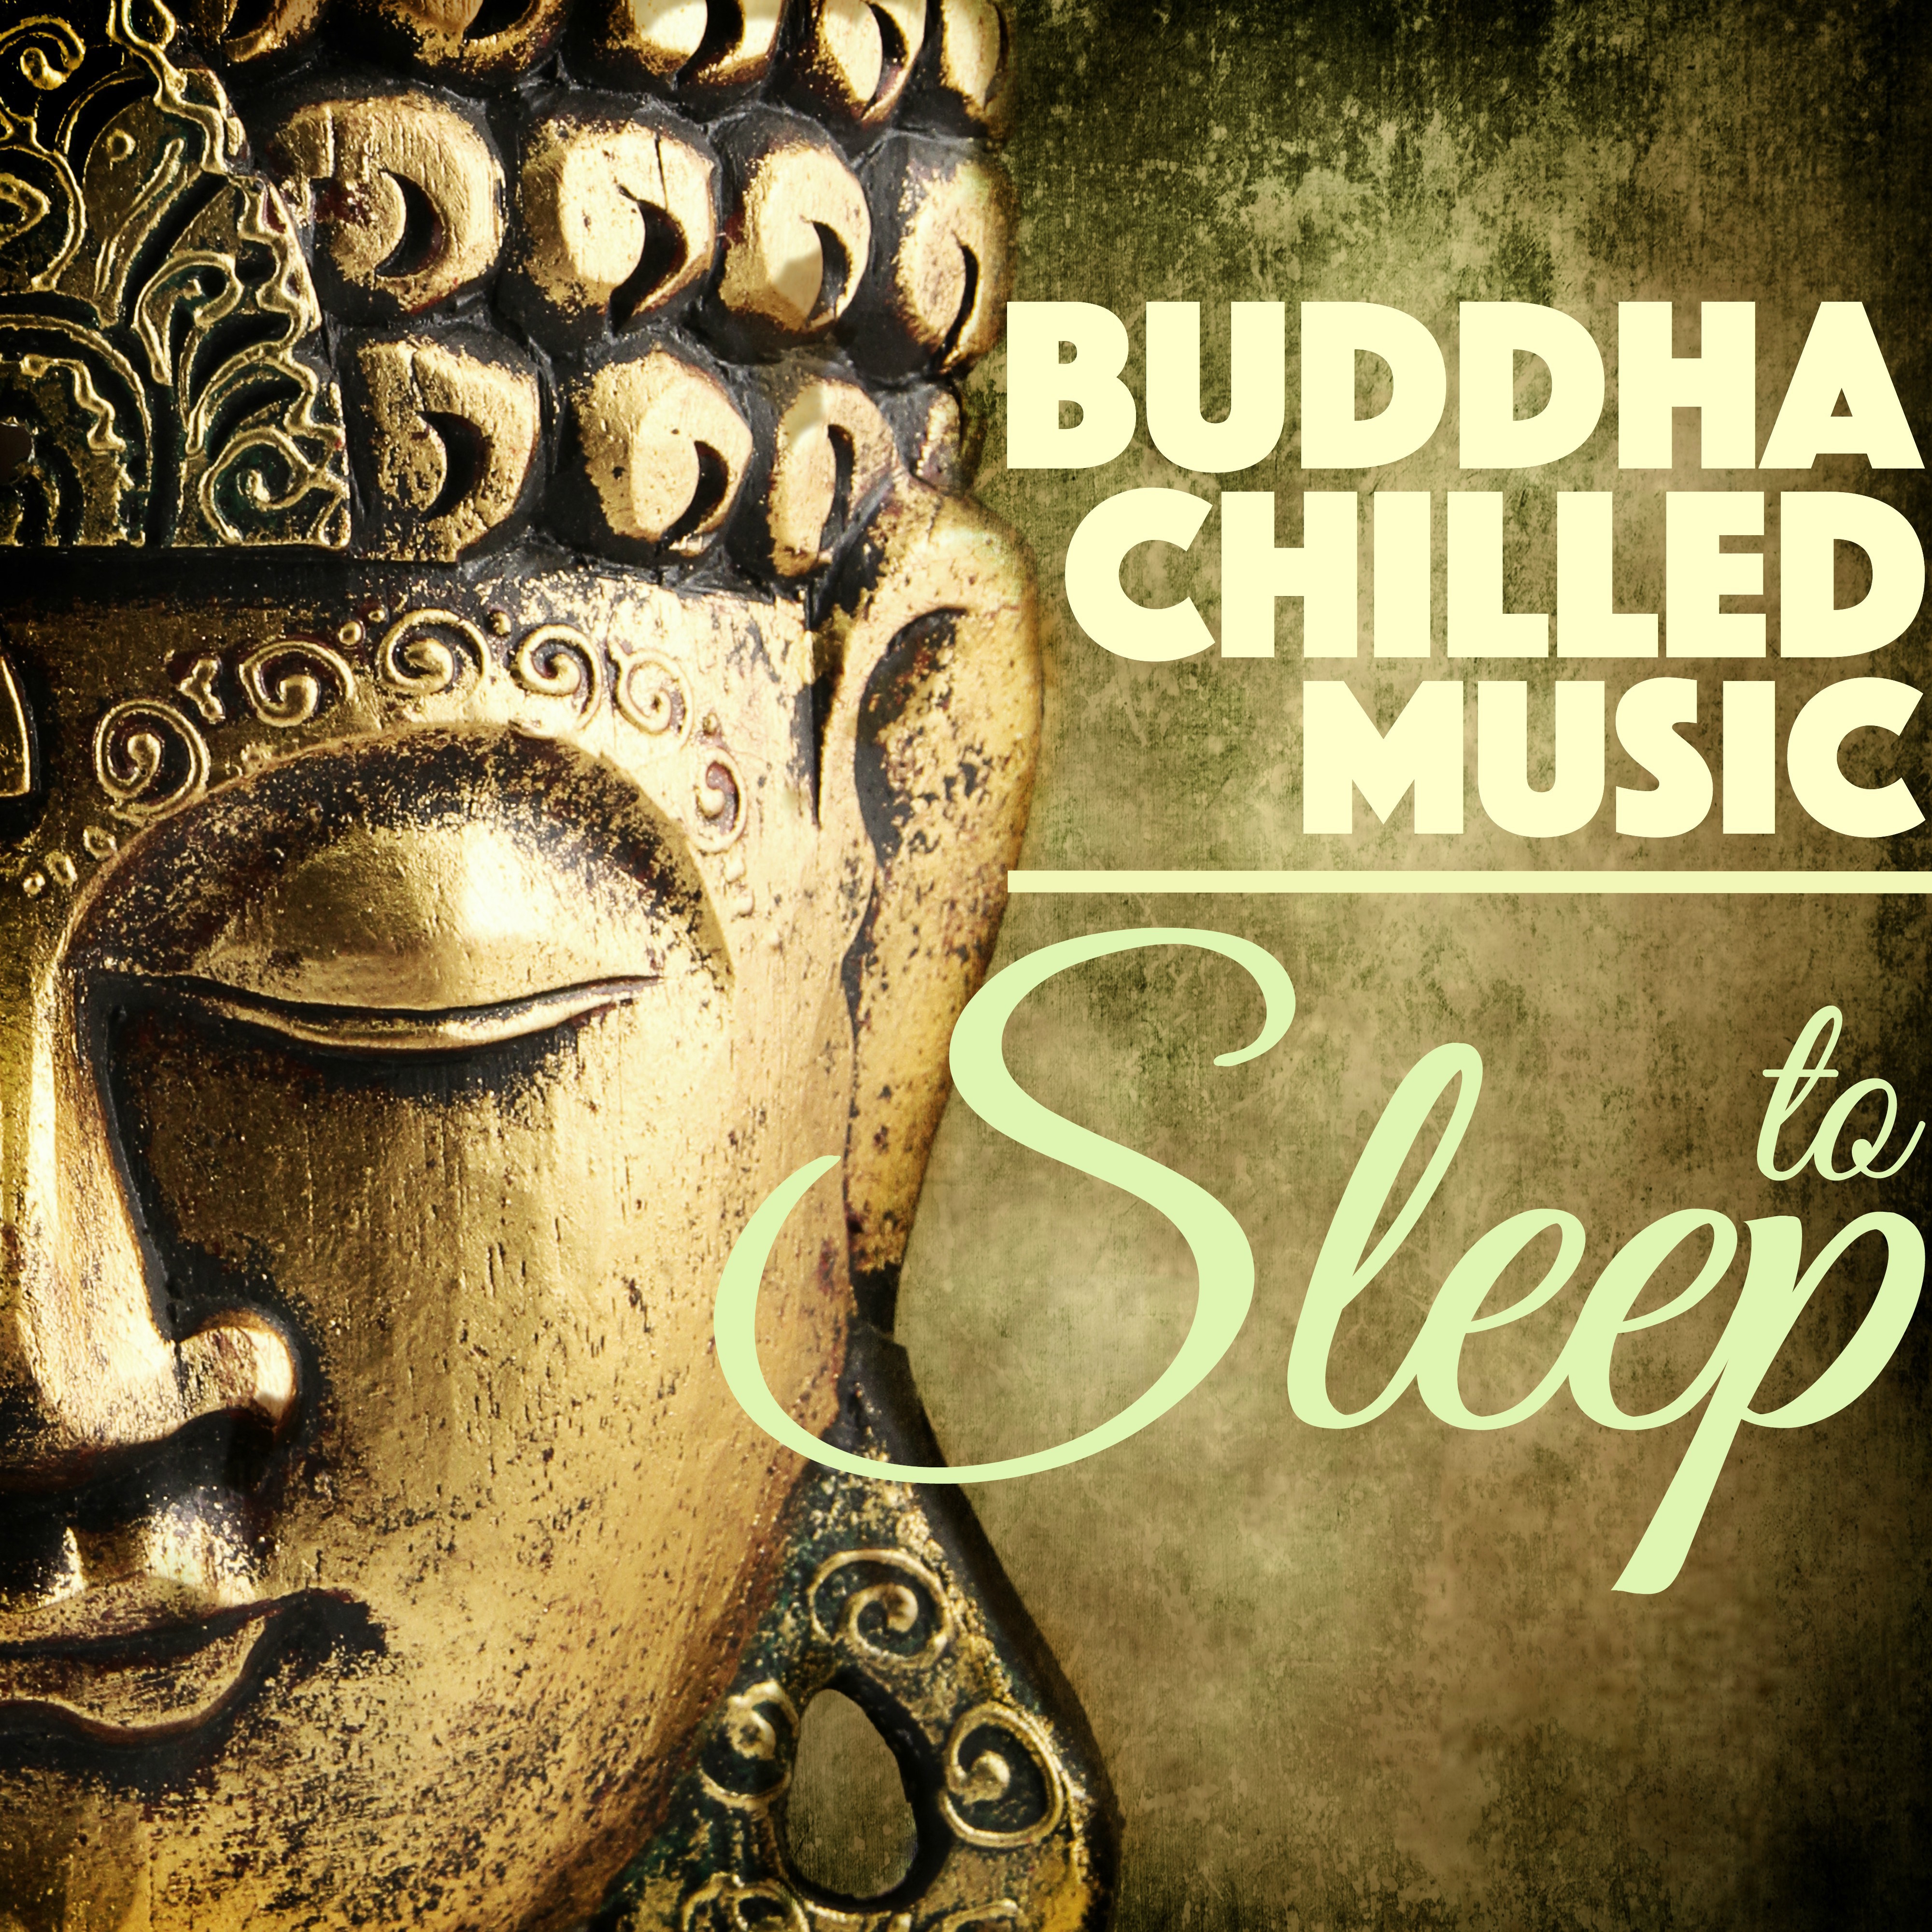 Buddha Chilled Music to Sleep - Best of Ambient Chillout Relaxation & Lounge Songs, Sound Therapy for Stress Relief and Sleepwell